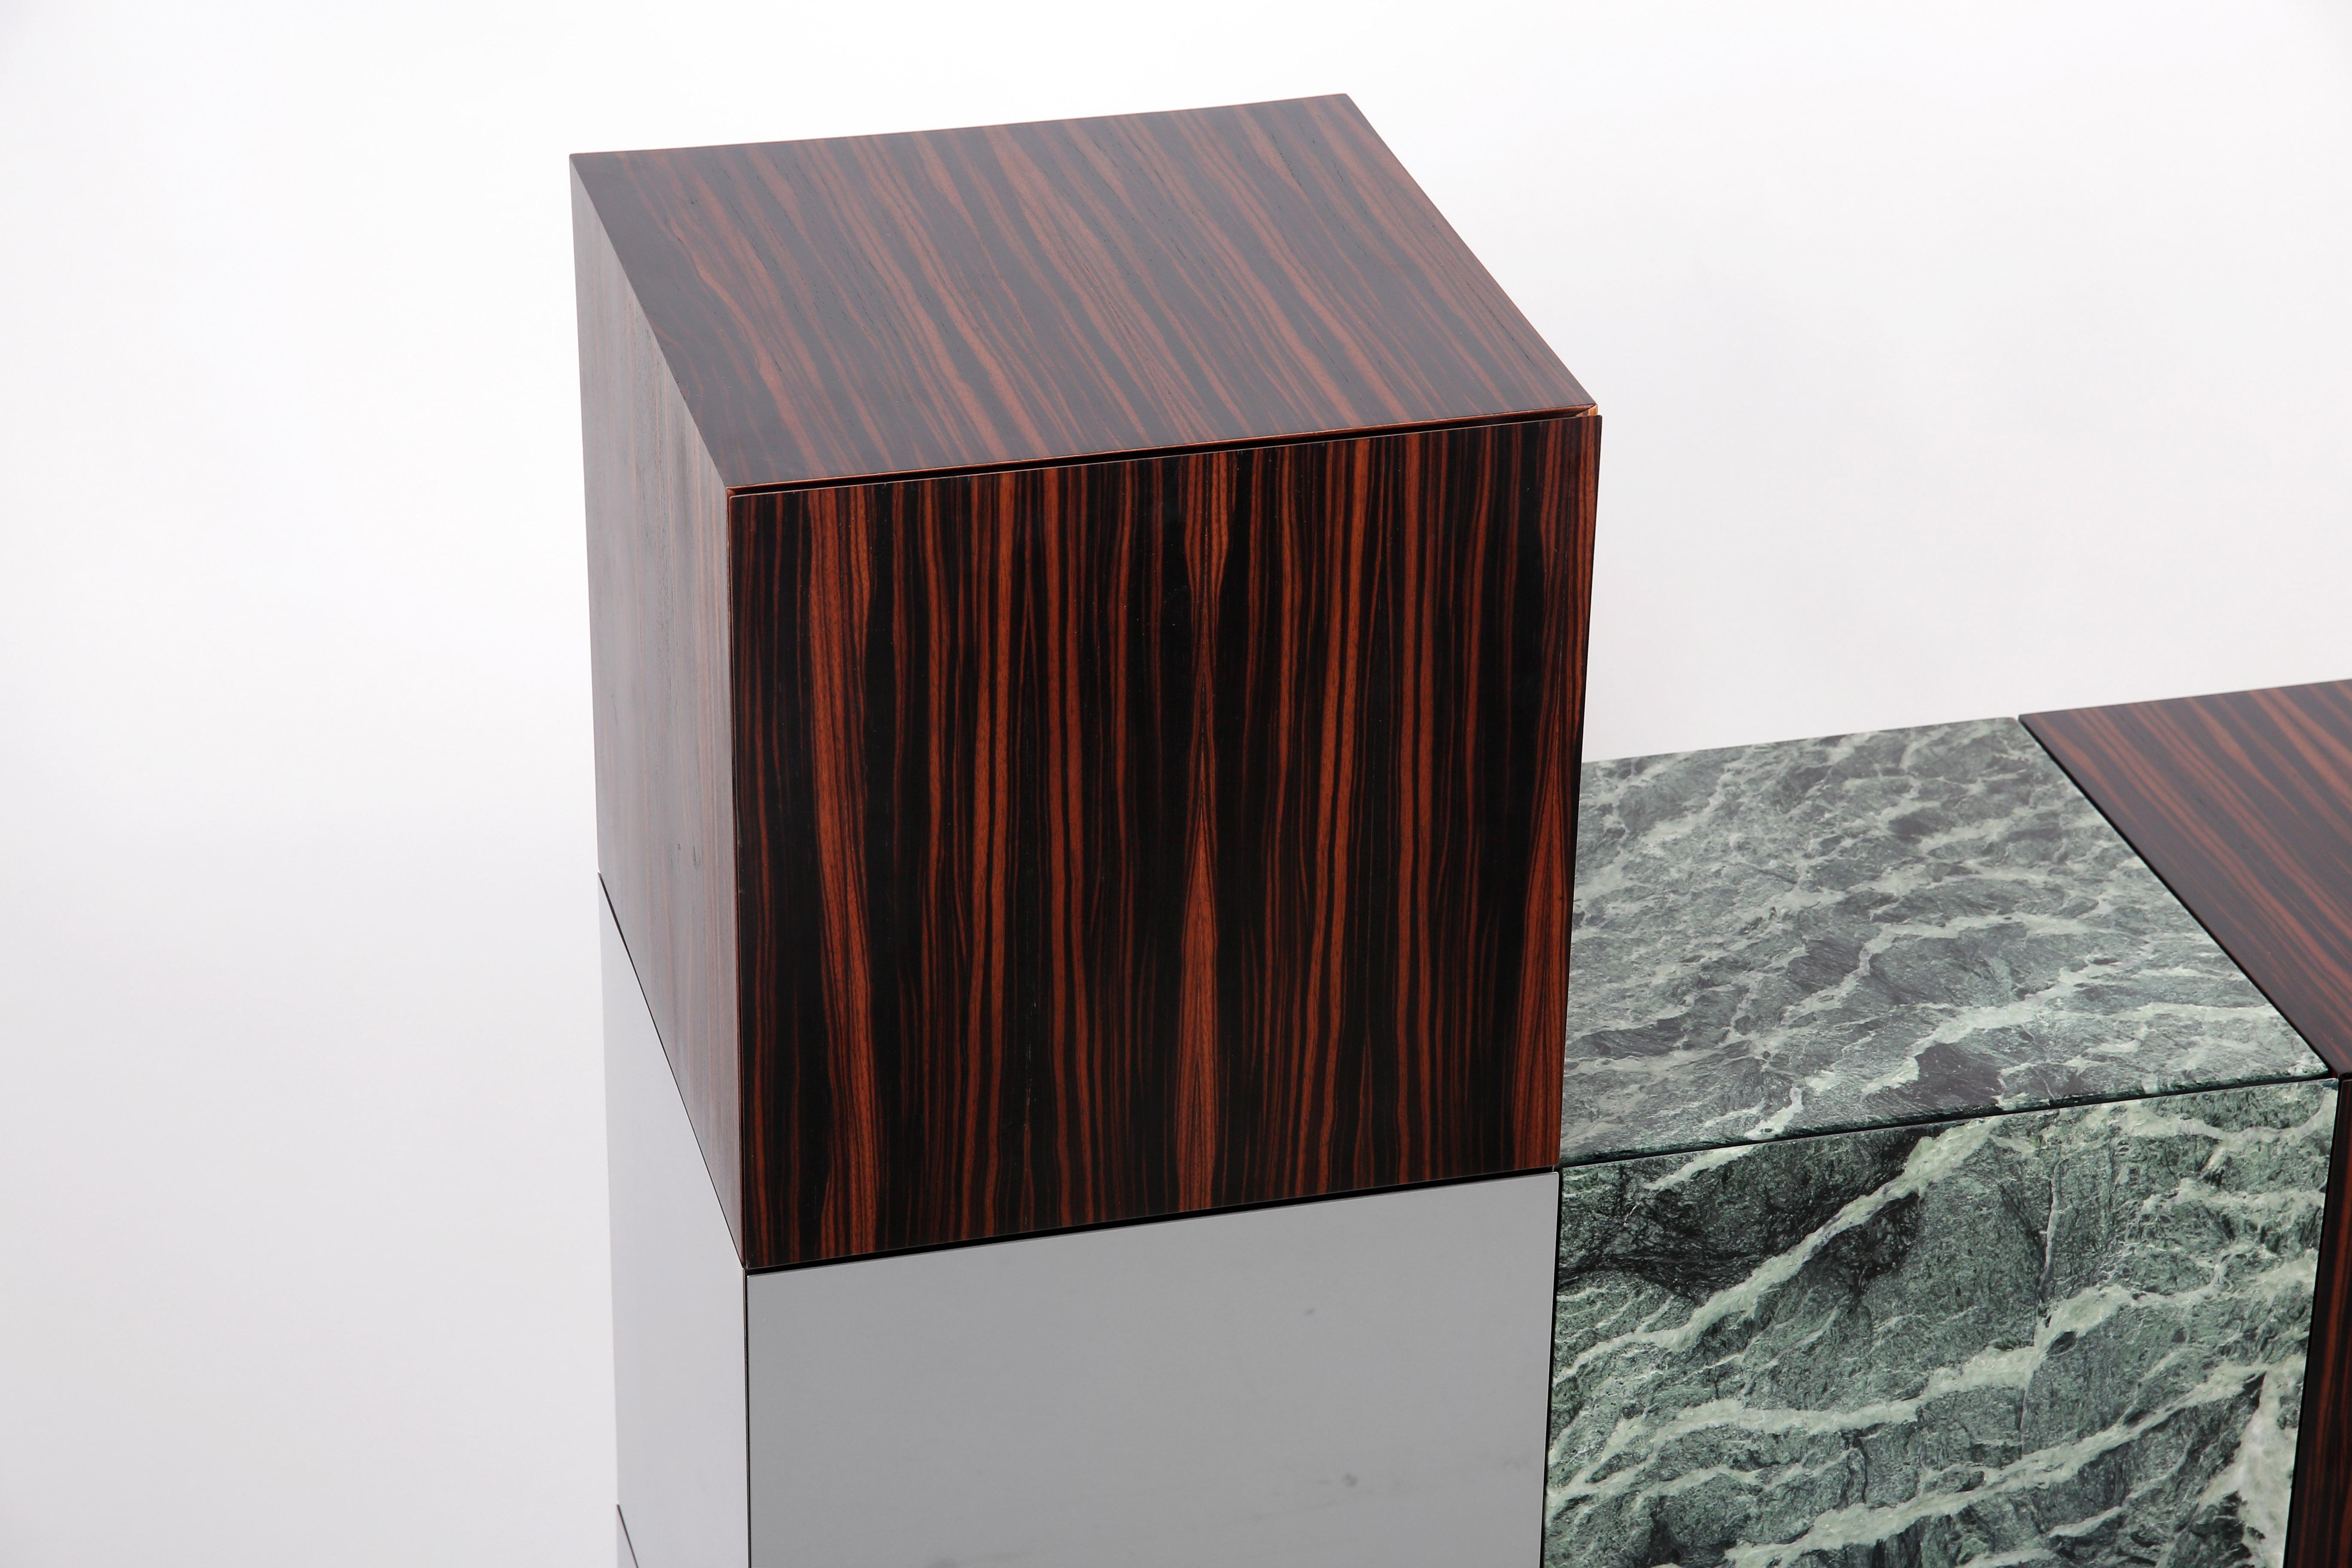 Cabinet CUCU

CUCU cabinet by Railis Design is the perfect addition to any modern living room or dining room. Store away your plates or knickknacks in a stylish way. Made of Ebony veneer, Verde alpi marble and polished stainless steel! Interior